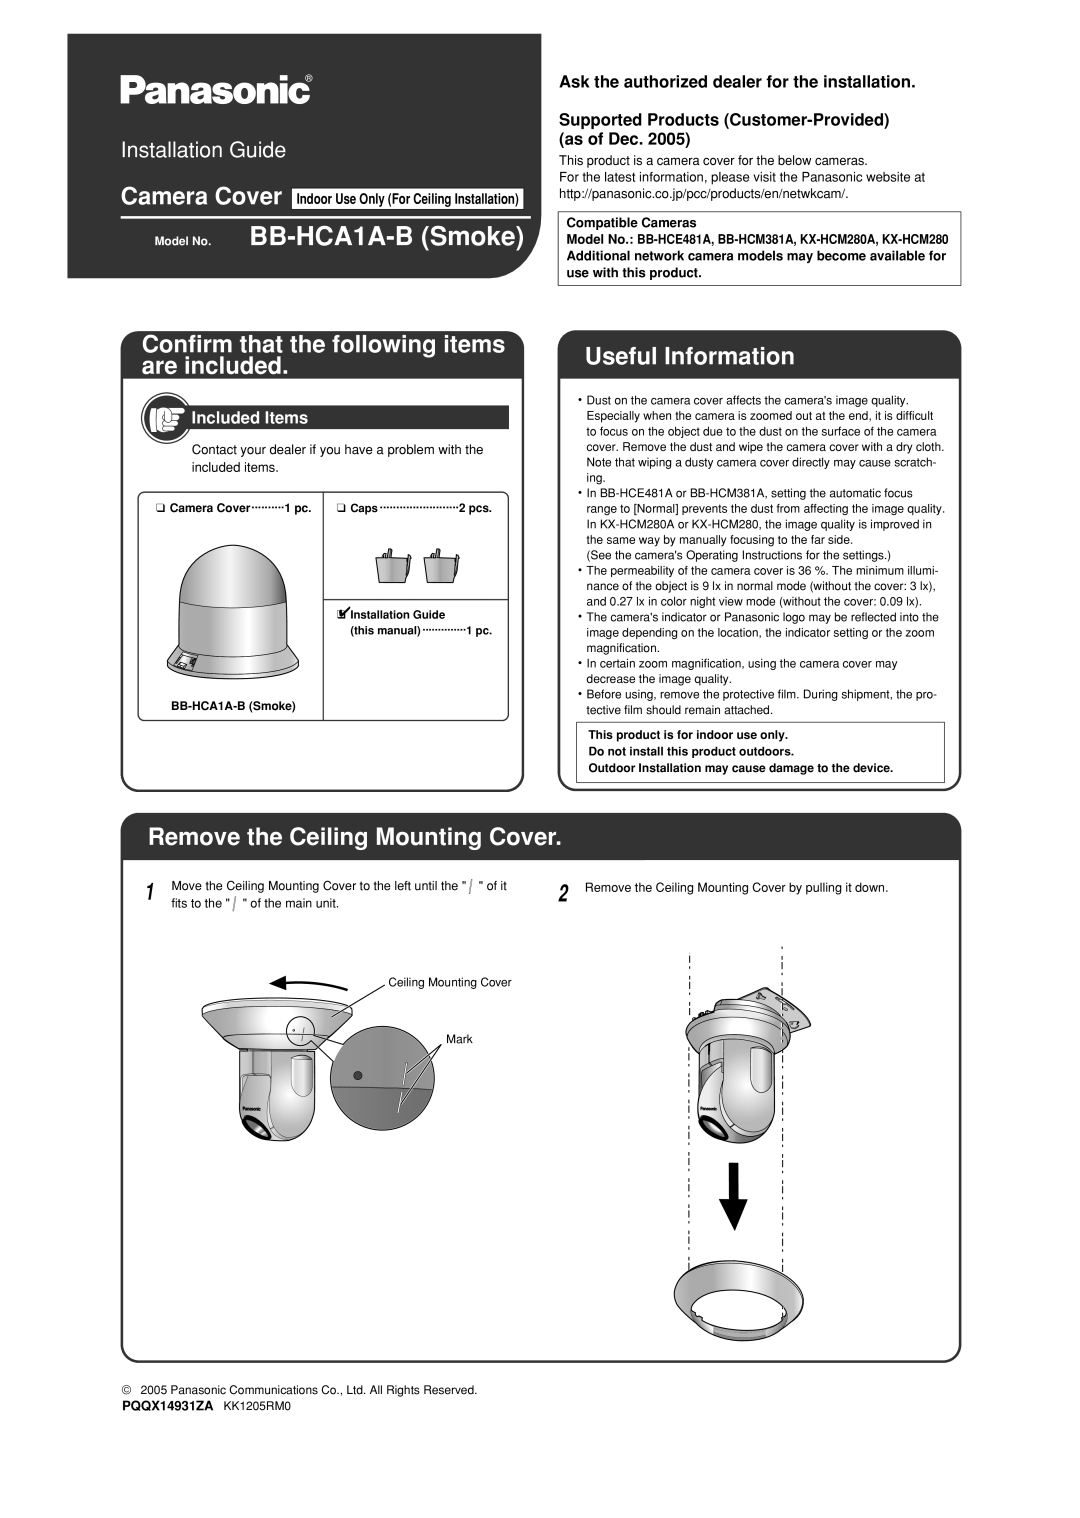 Panasonic Bb Hca1a B manual Confirm that the following items are included, Useful Information, Model No. BB-HCA1A-BSmoke 